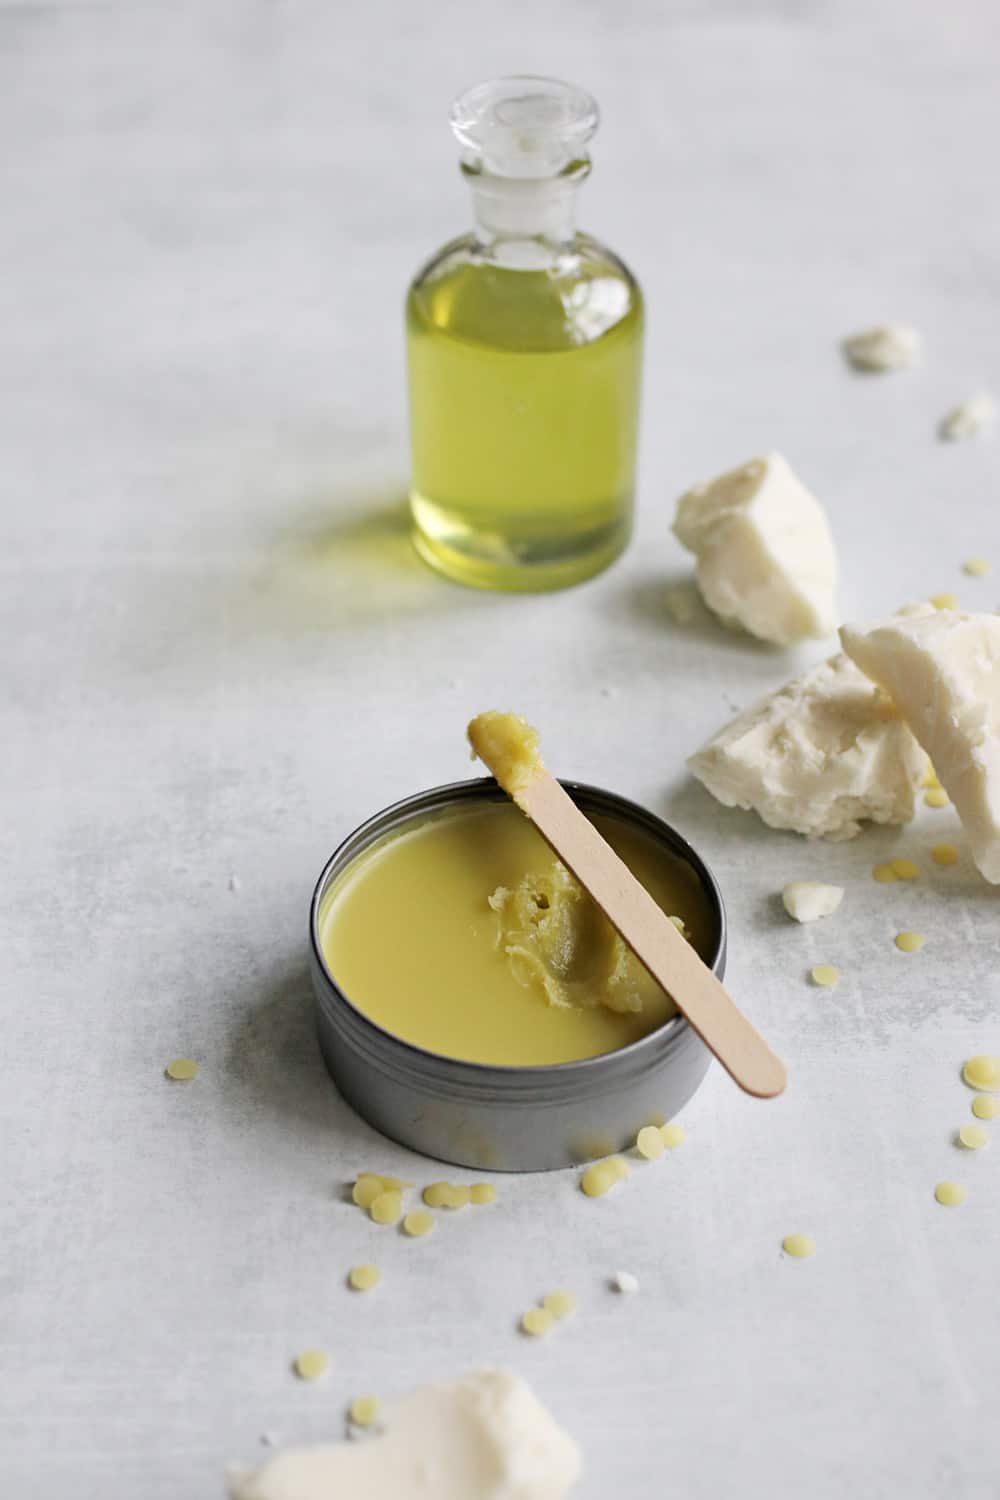 Dry, Chapped Hands? You Need This Kokum Butter Hand Balm